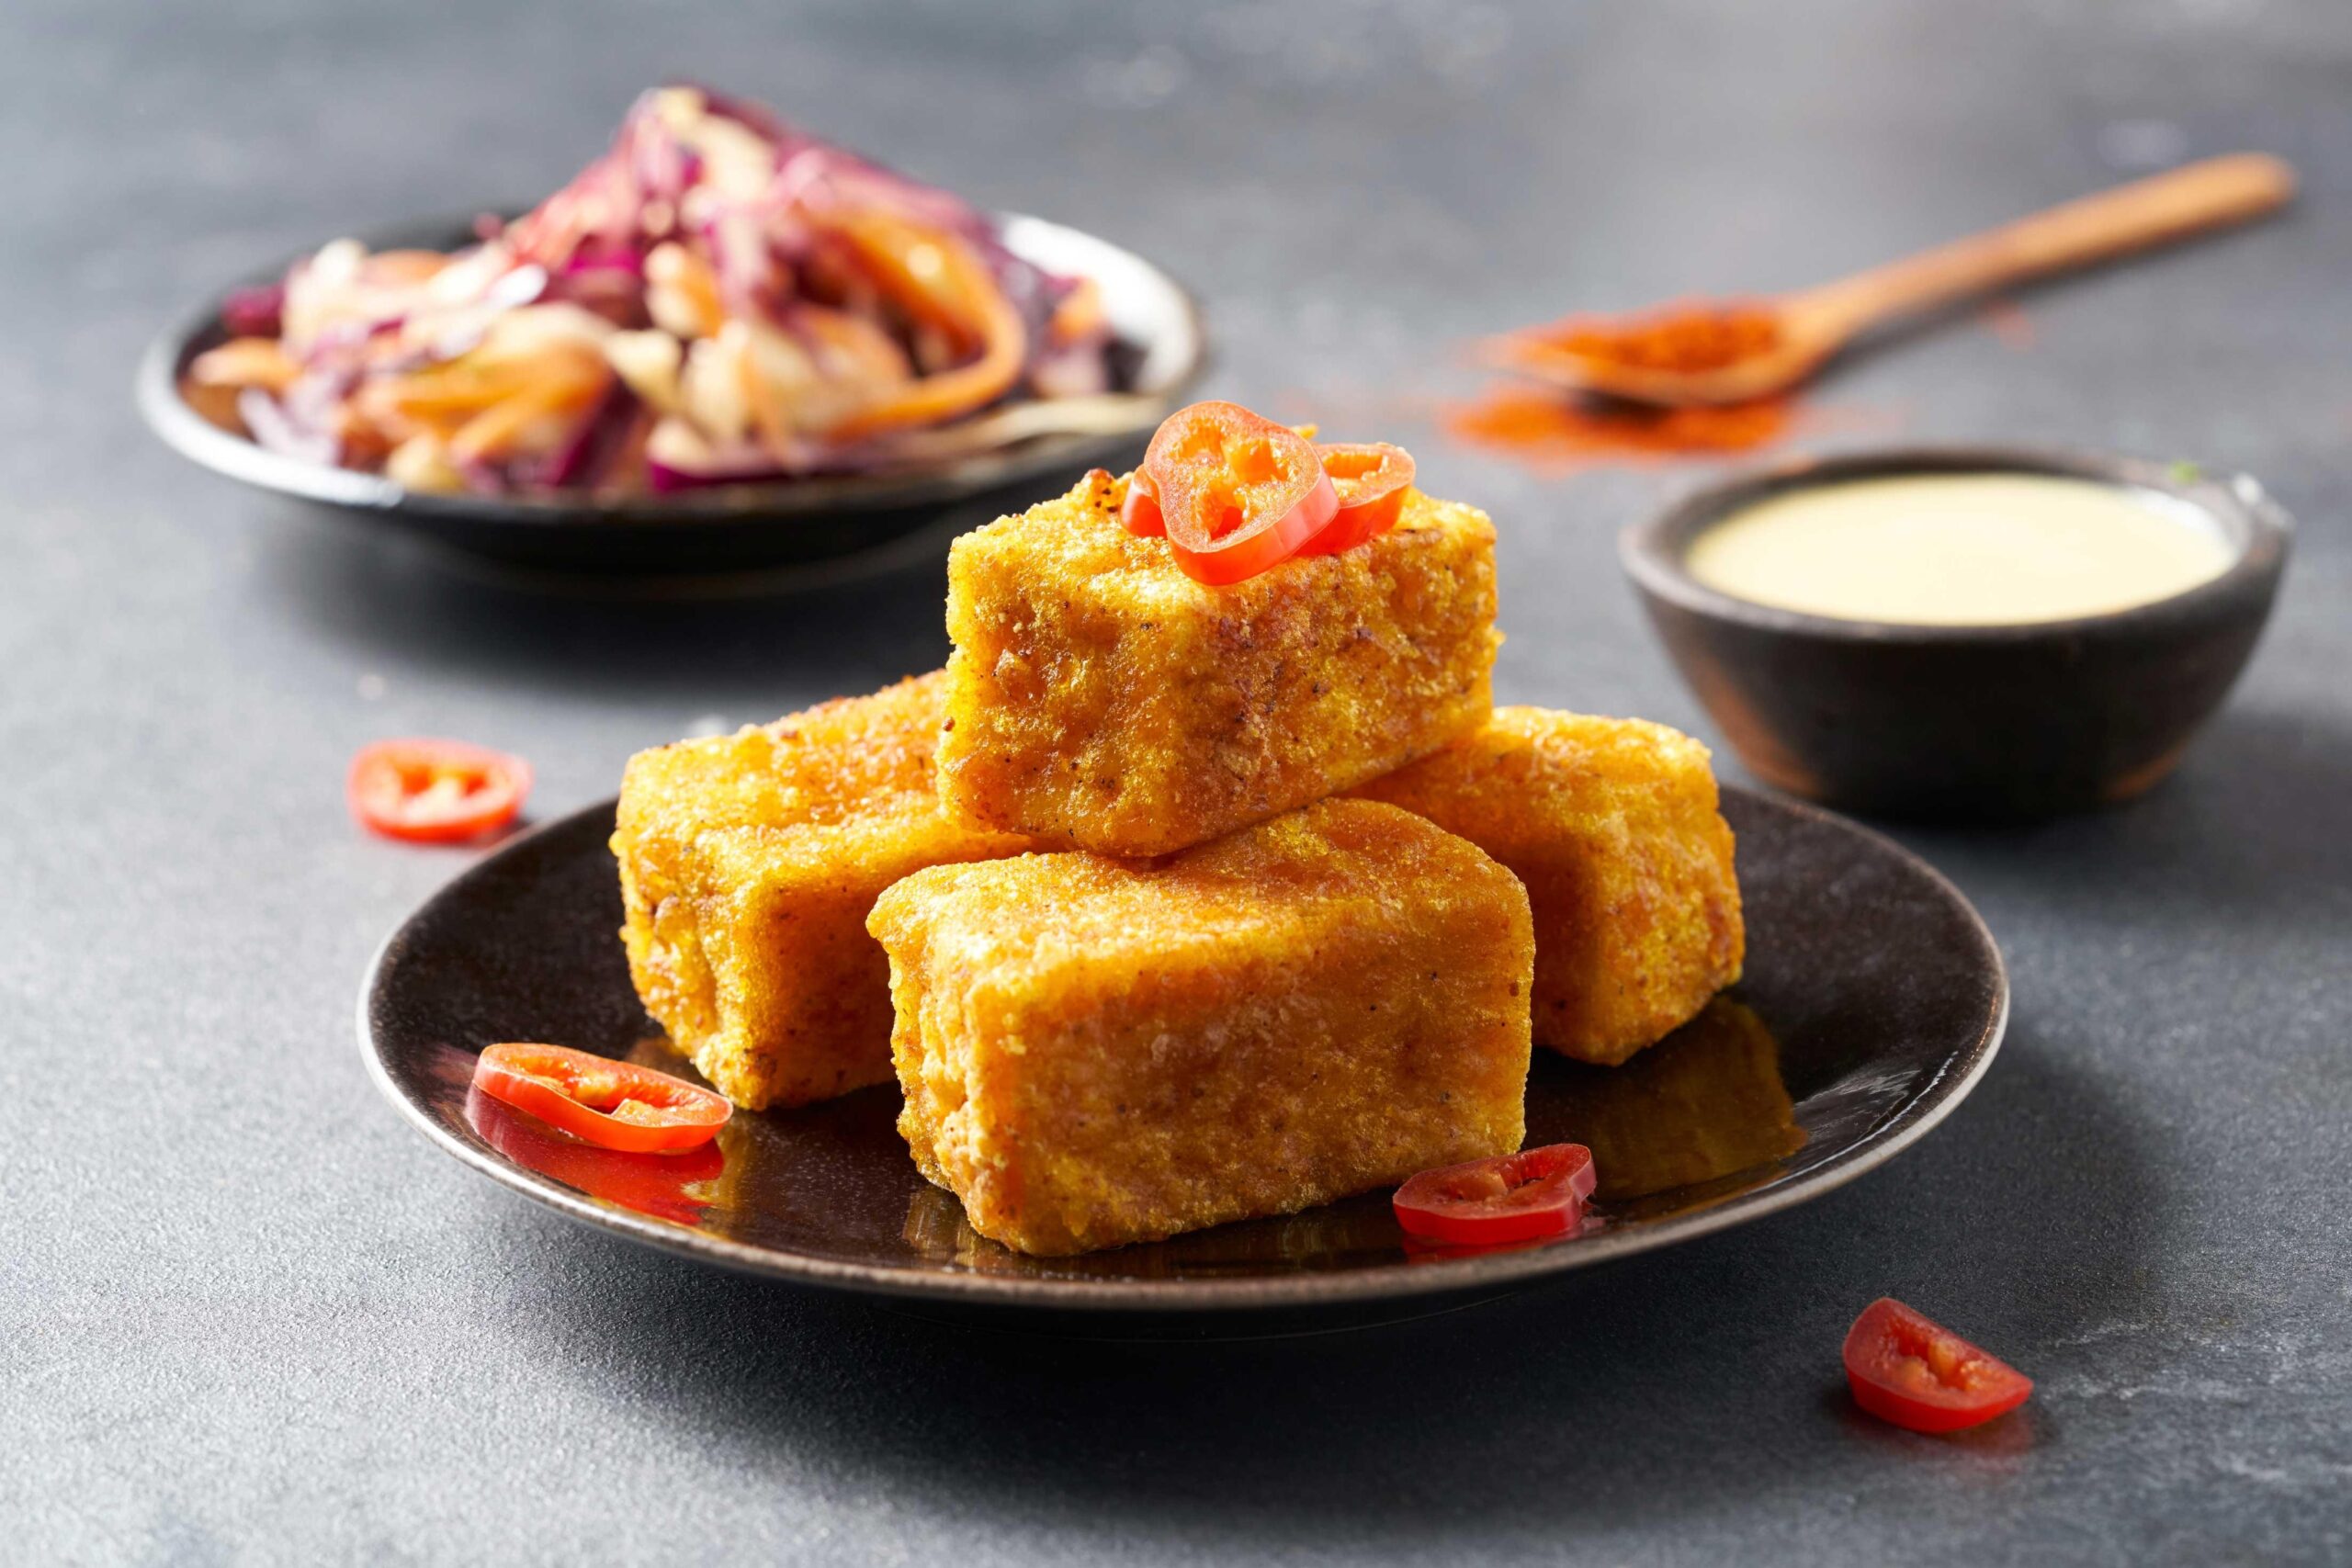  If you're a fan of southern-style cuisine but looking for a plant-based option, we've got you covered with our Southern Fried Tofu.